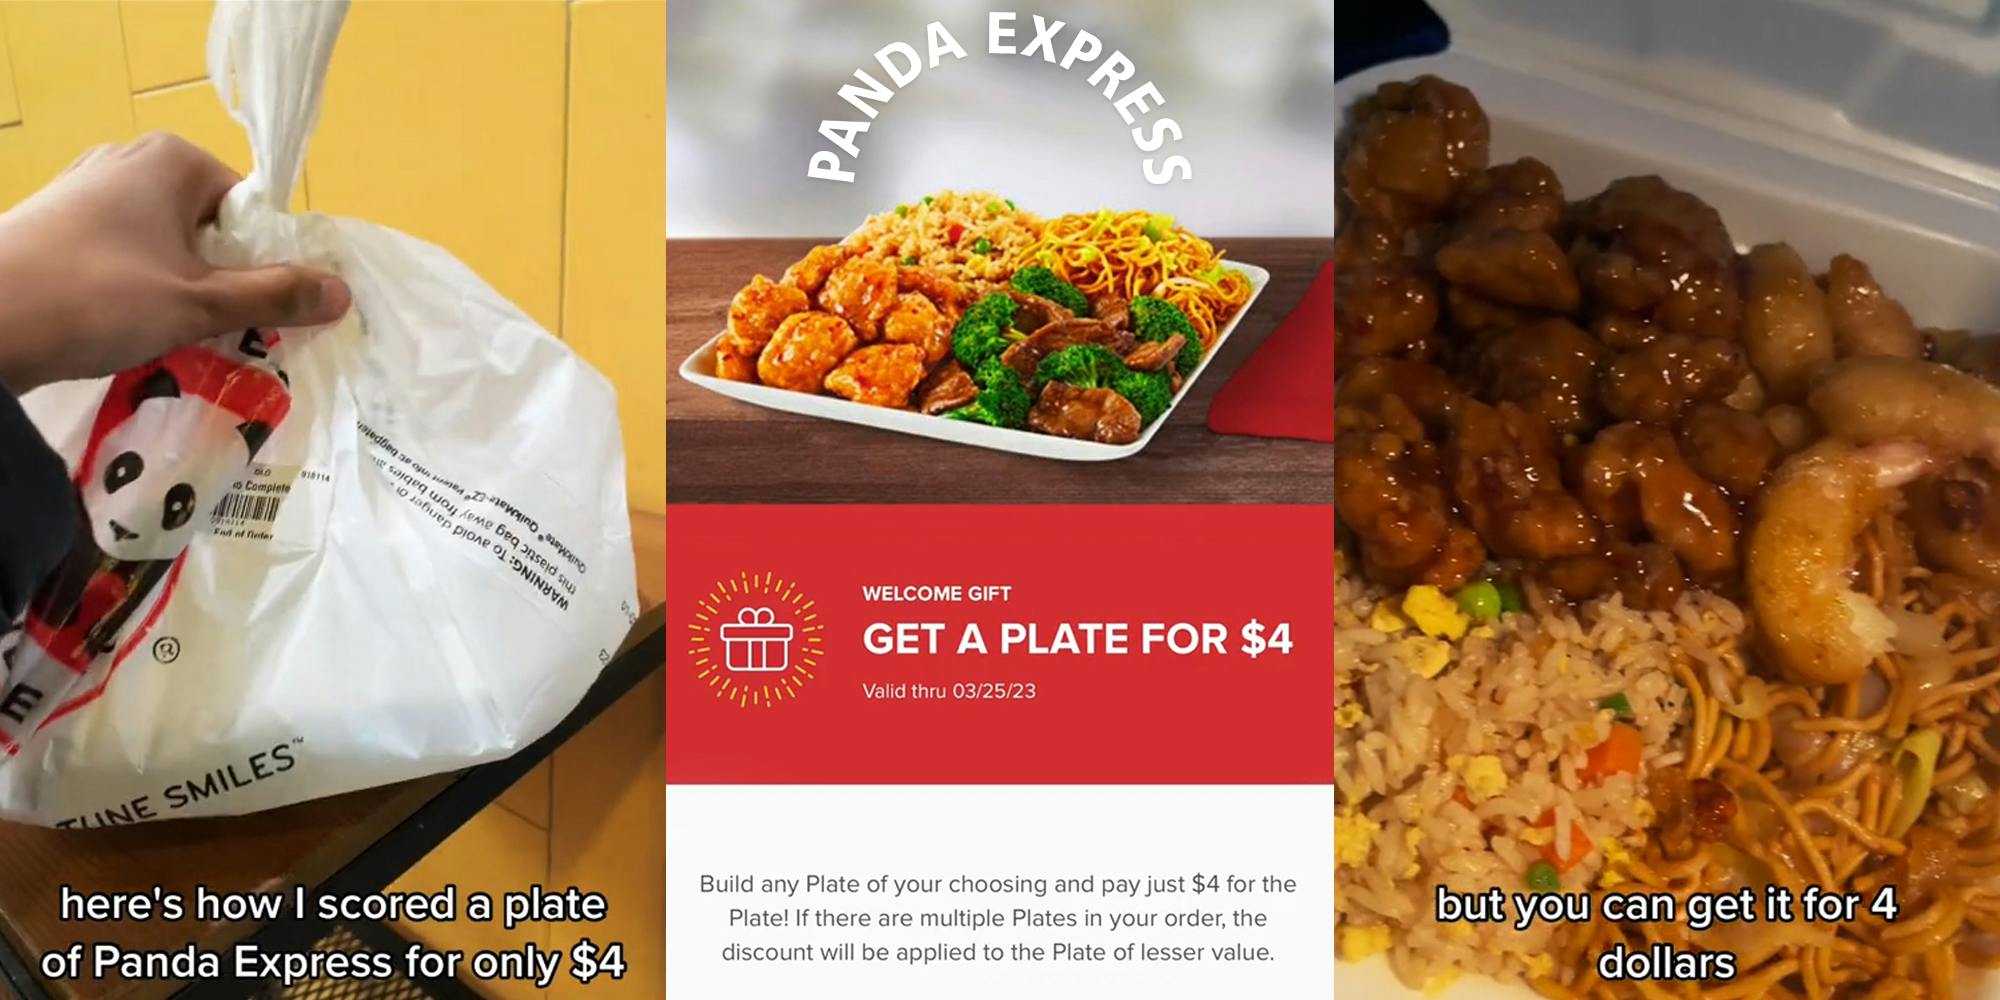 person holding Panda Express plastic bag with food inside with caption "here's how I scored a plate of Panda Express for only $4" (l) Panda Express welcome gift in app if $4 plate with Panda Express logo at top (c) Panda express food in container with caption "but you can get it for 4 dollars" (r)